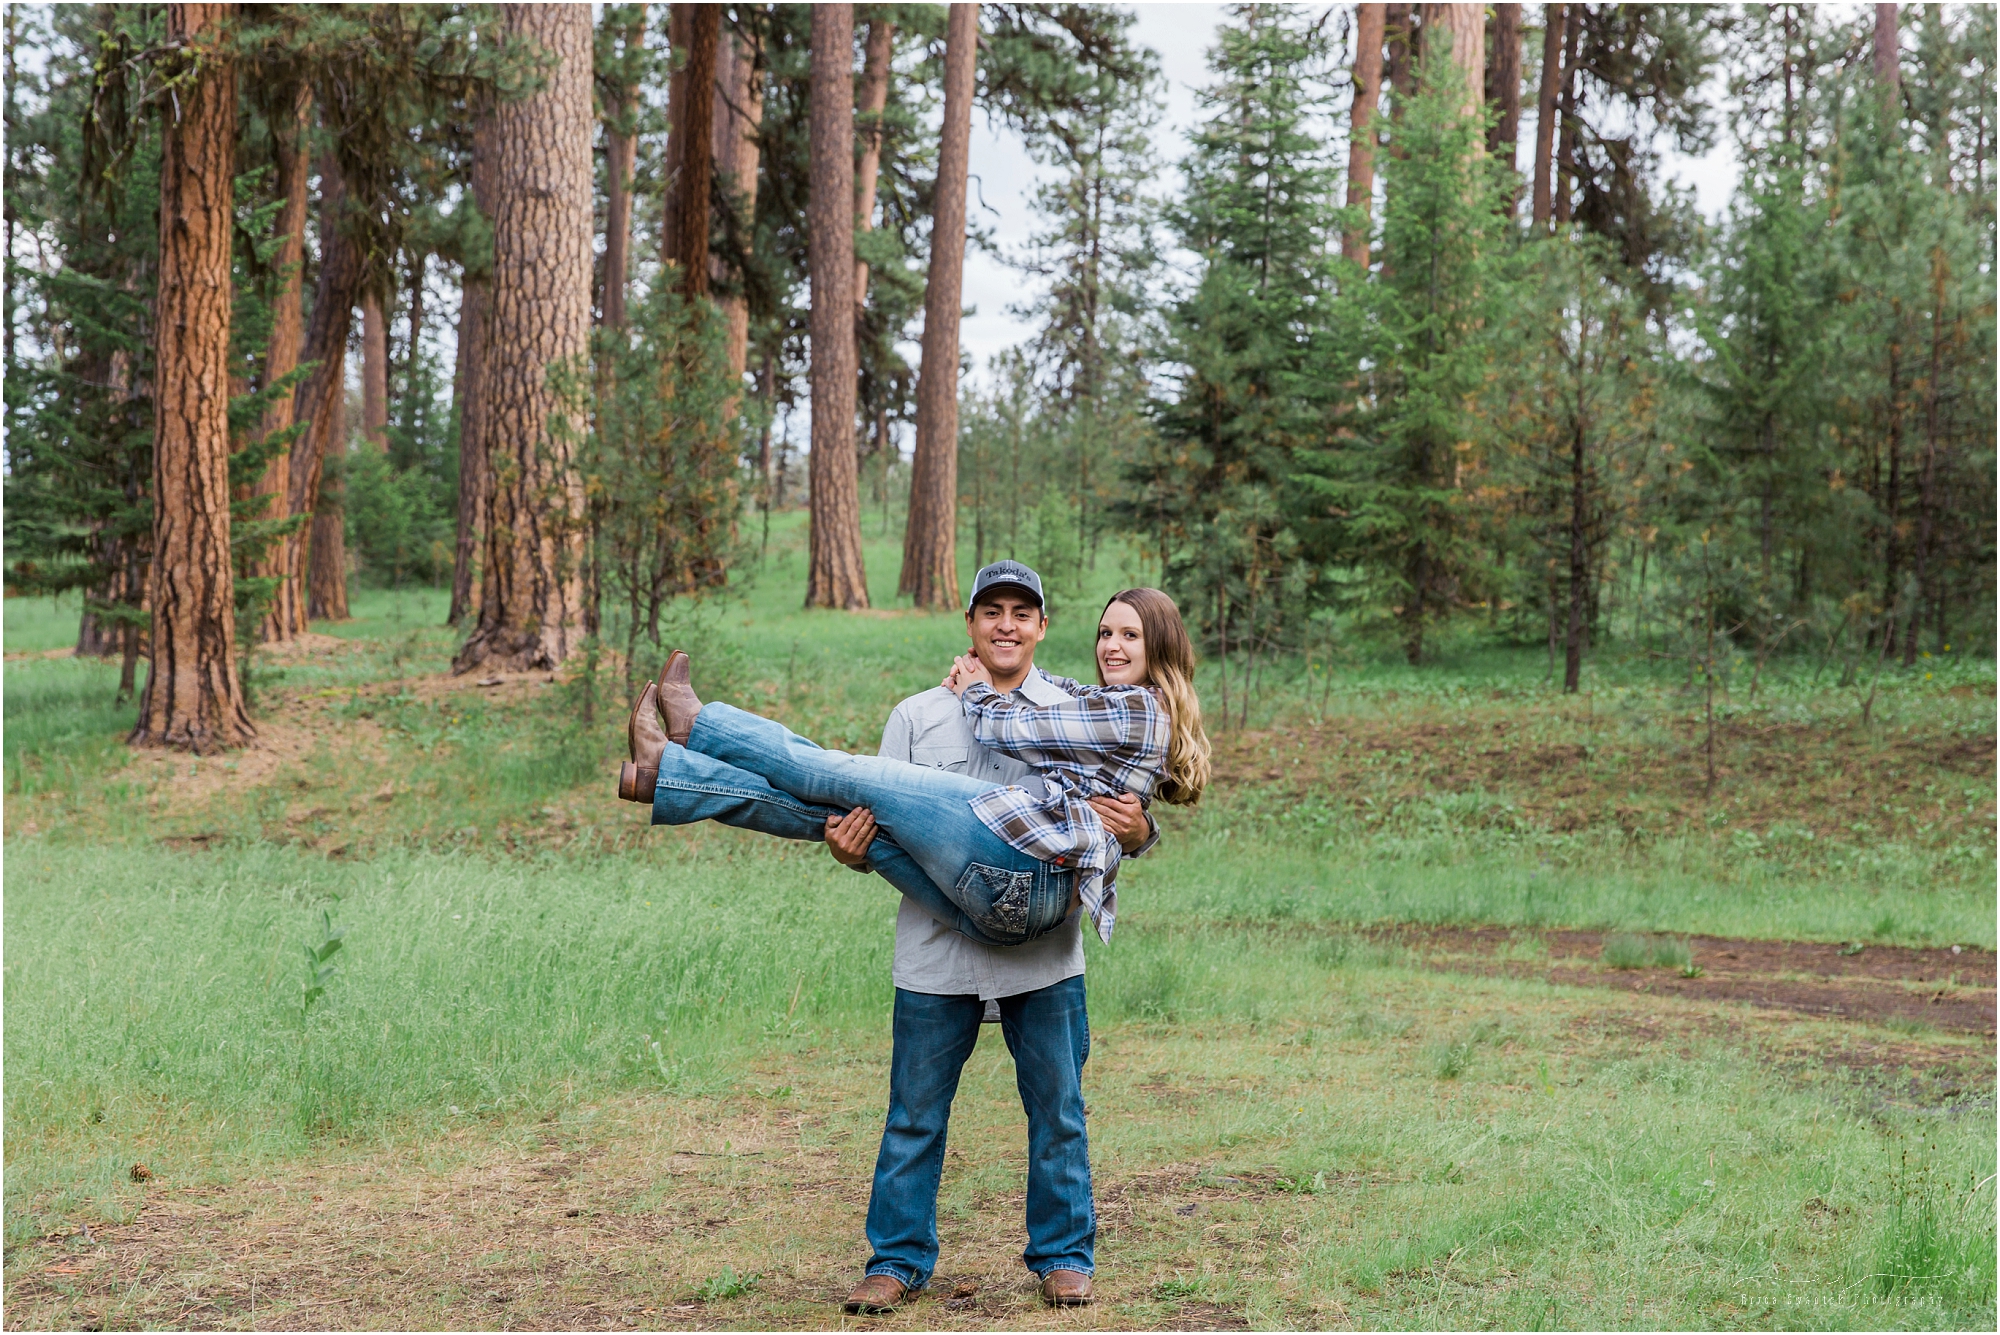 A fun Oregon outdoor adventure engagement session by Bend OR wedding photographer Erica Swantek Photography.